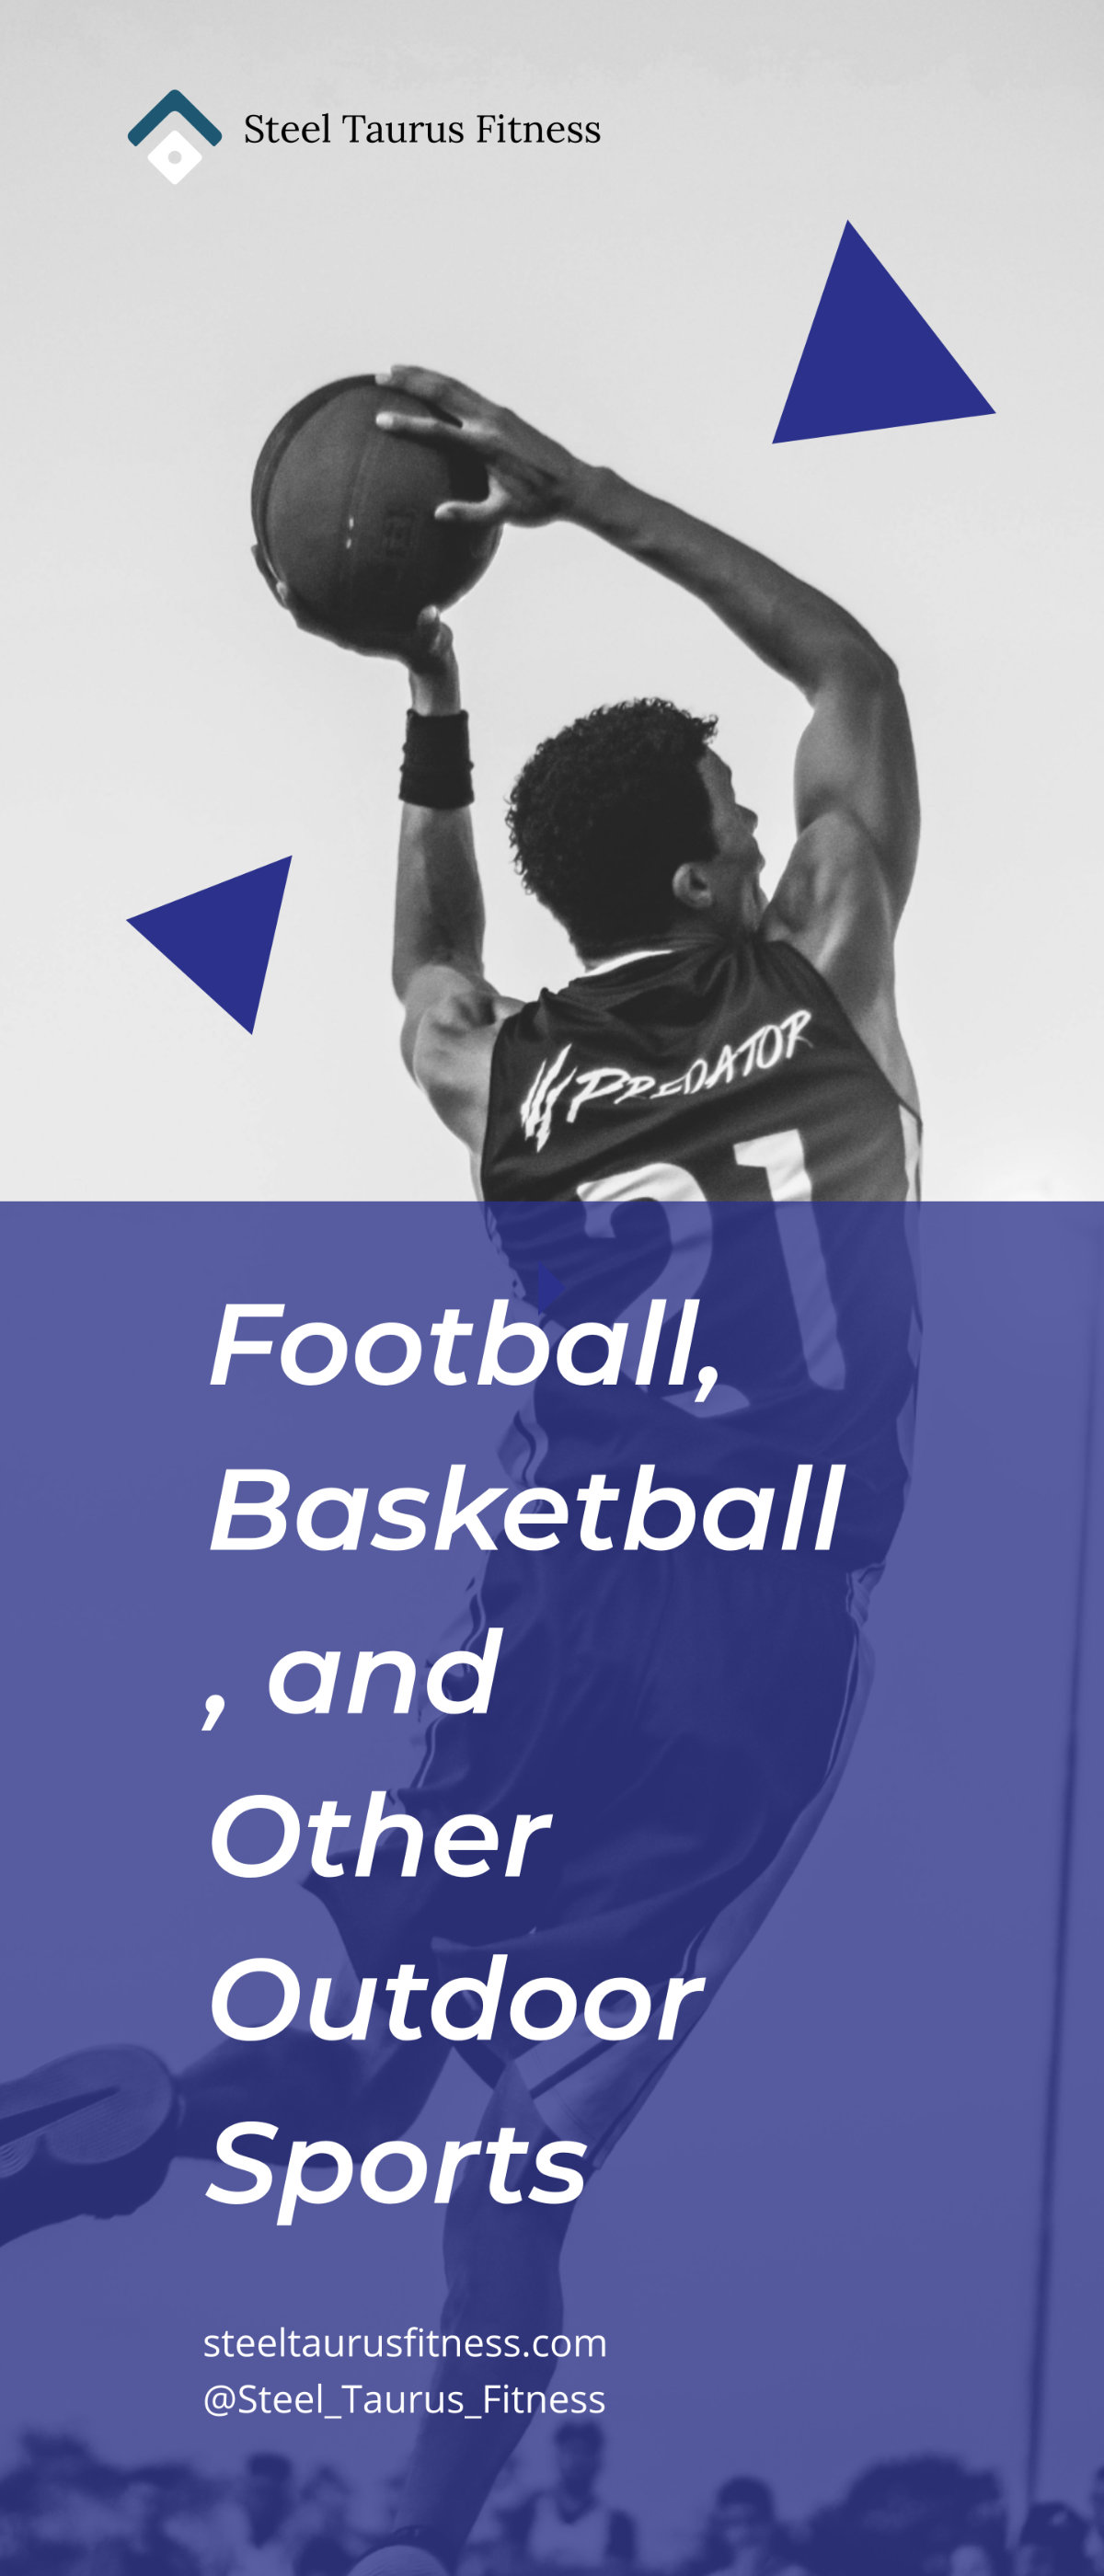 Free Sports Outdoor Roll Up Banner Template